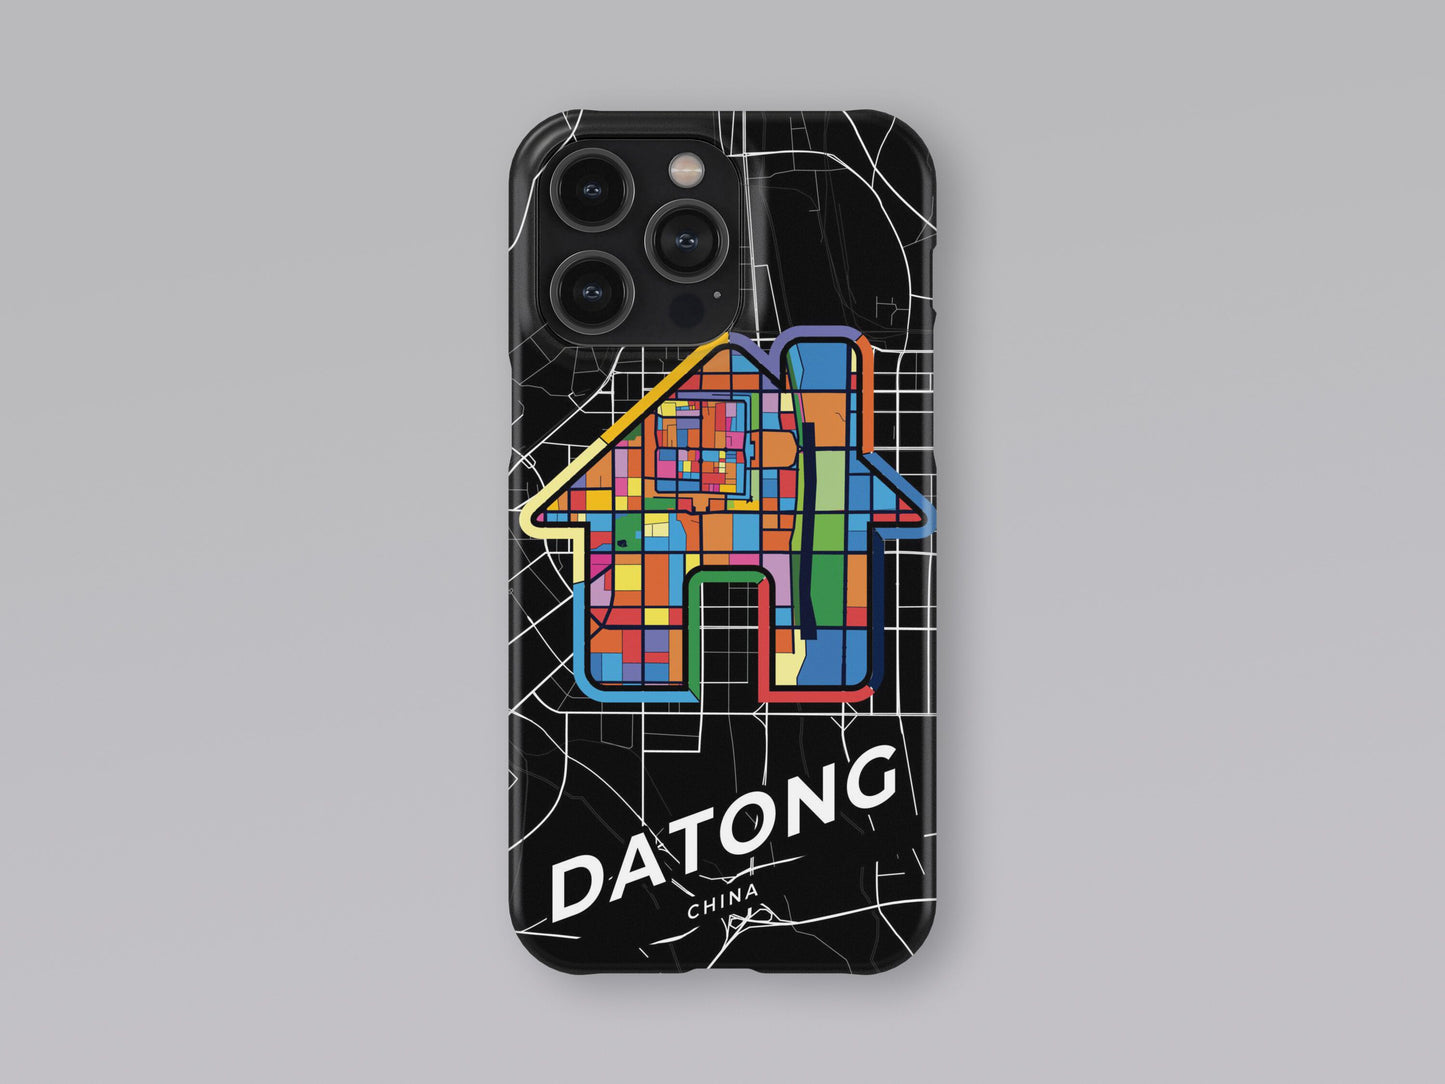 Datong China slim phone case with colorful icon. Birthday, wedding or housewarming gift. Couple match cases. 3